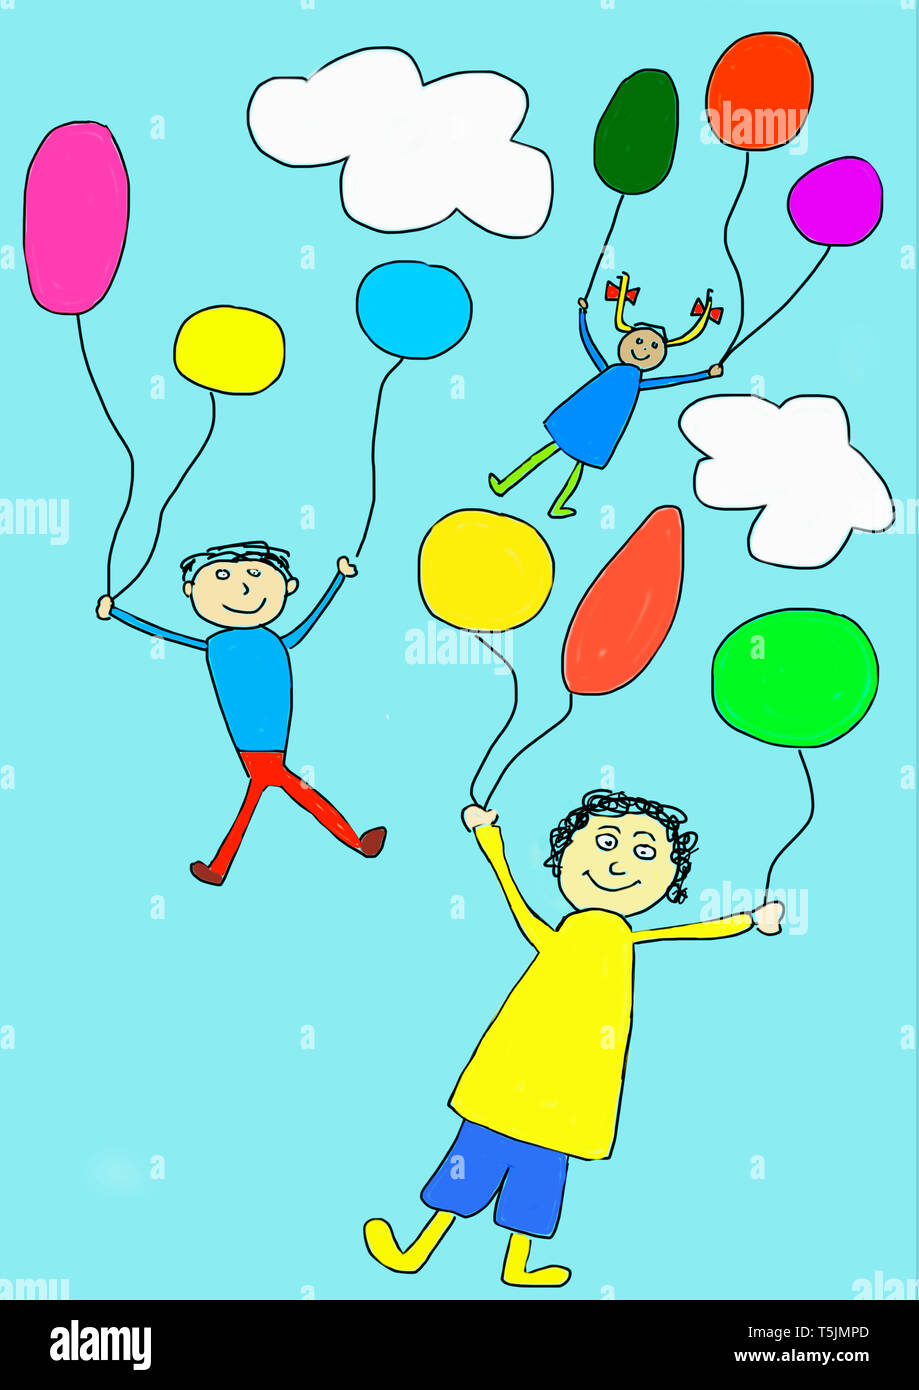 Children's drawing of three happy children flying away with balloons Stock Photo